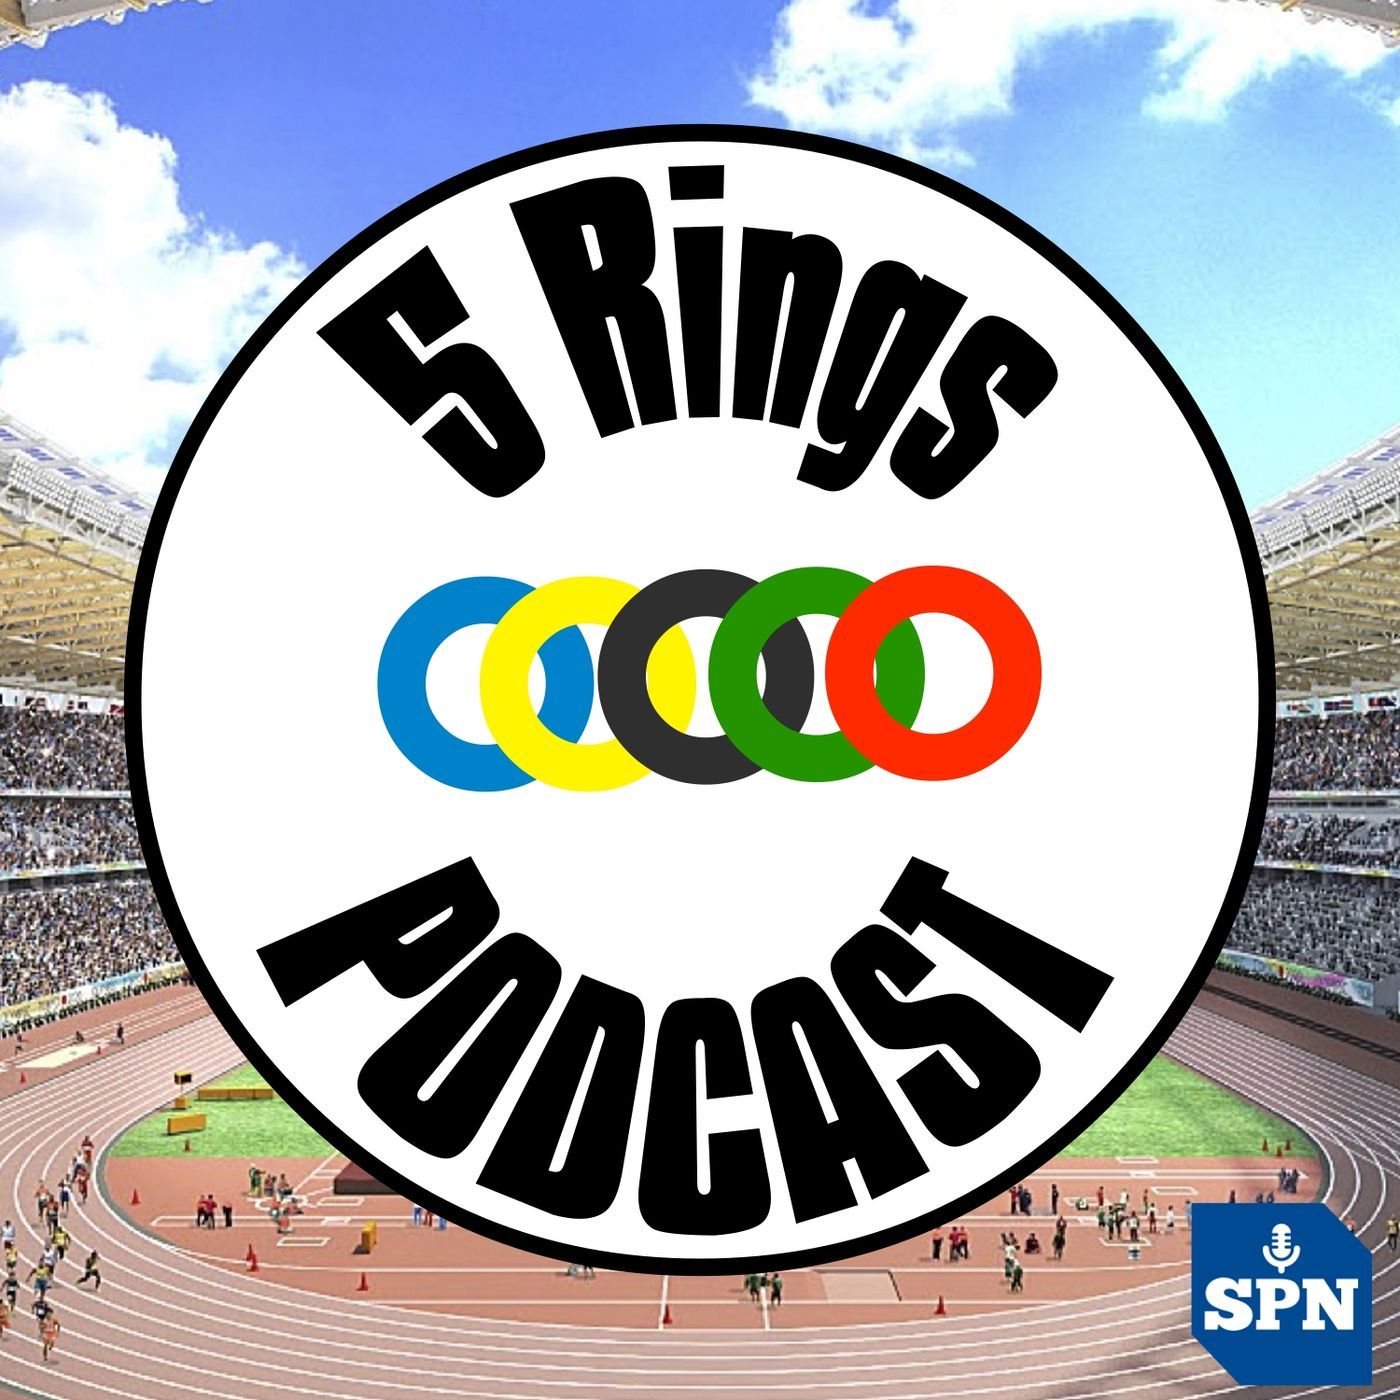 5 Rings Podcast - Daily Coverage of Tokyo 2020 with Kevin Laramee and Duane Rollins - Day 8 Review